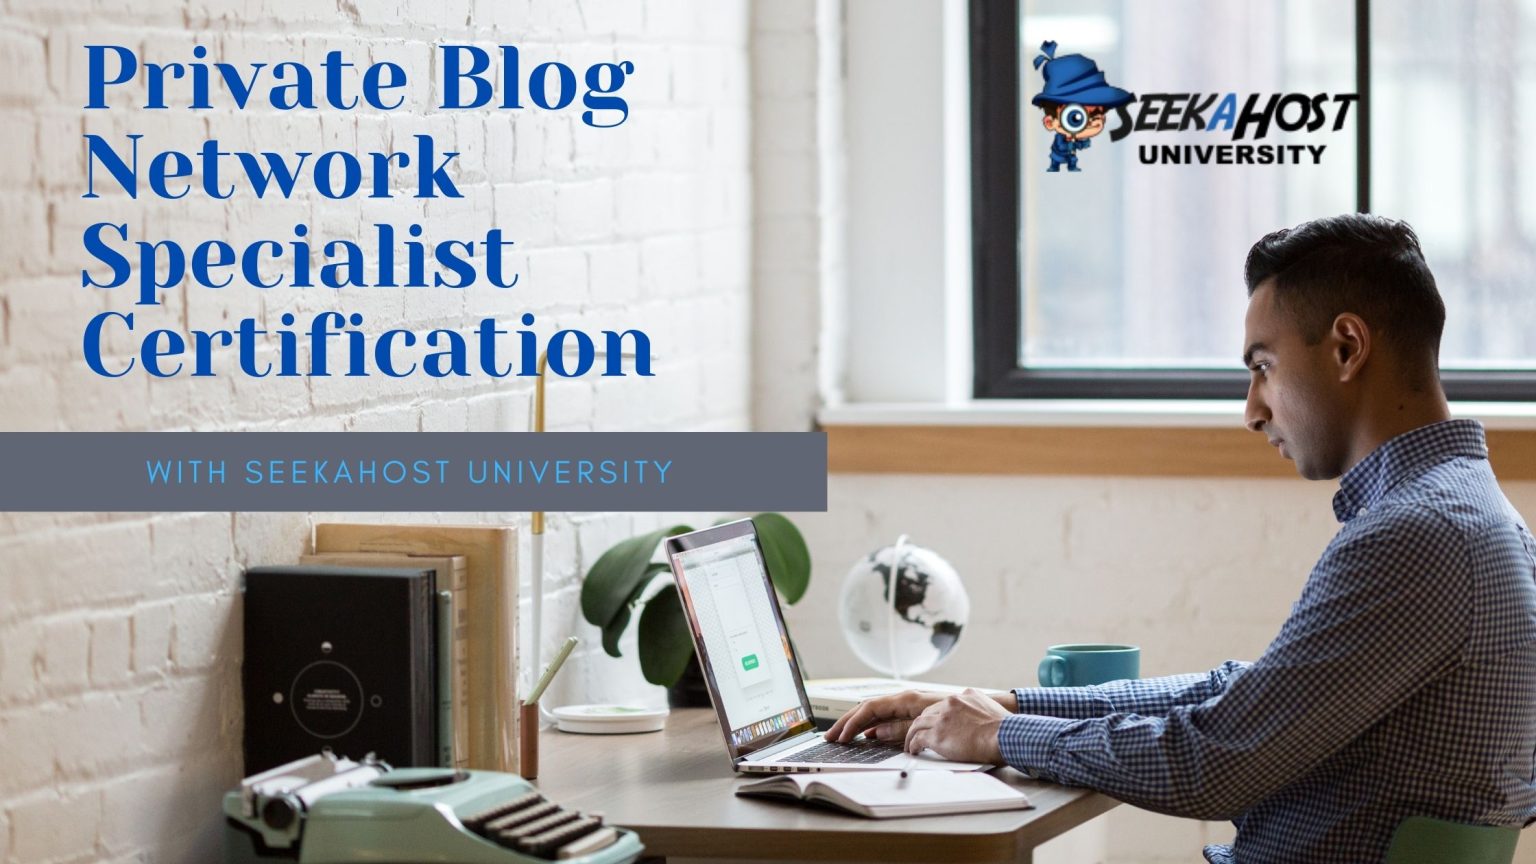 a private blog network specialist with the seekahost university training SeekaHost